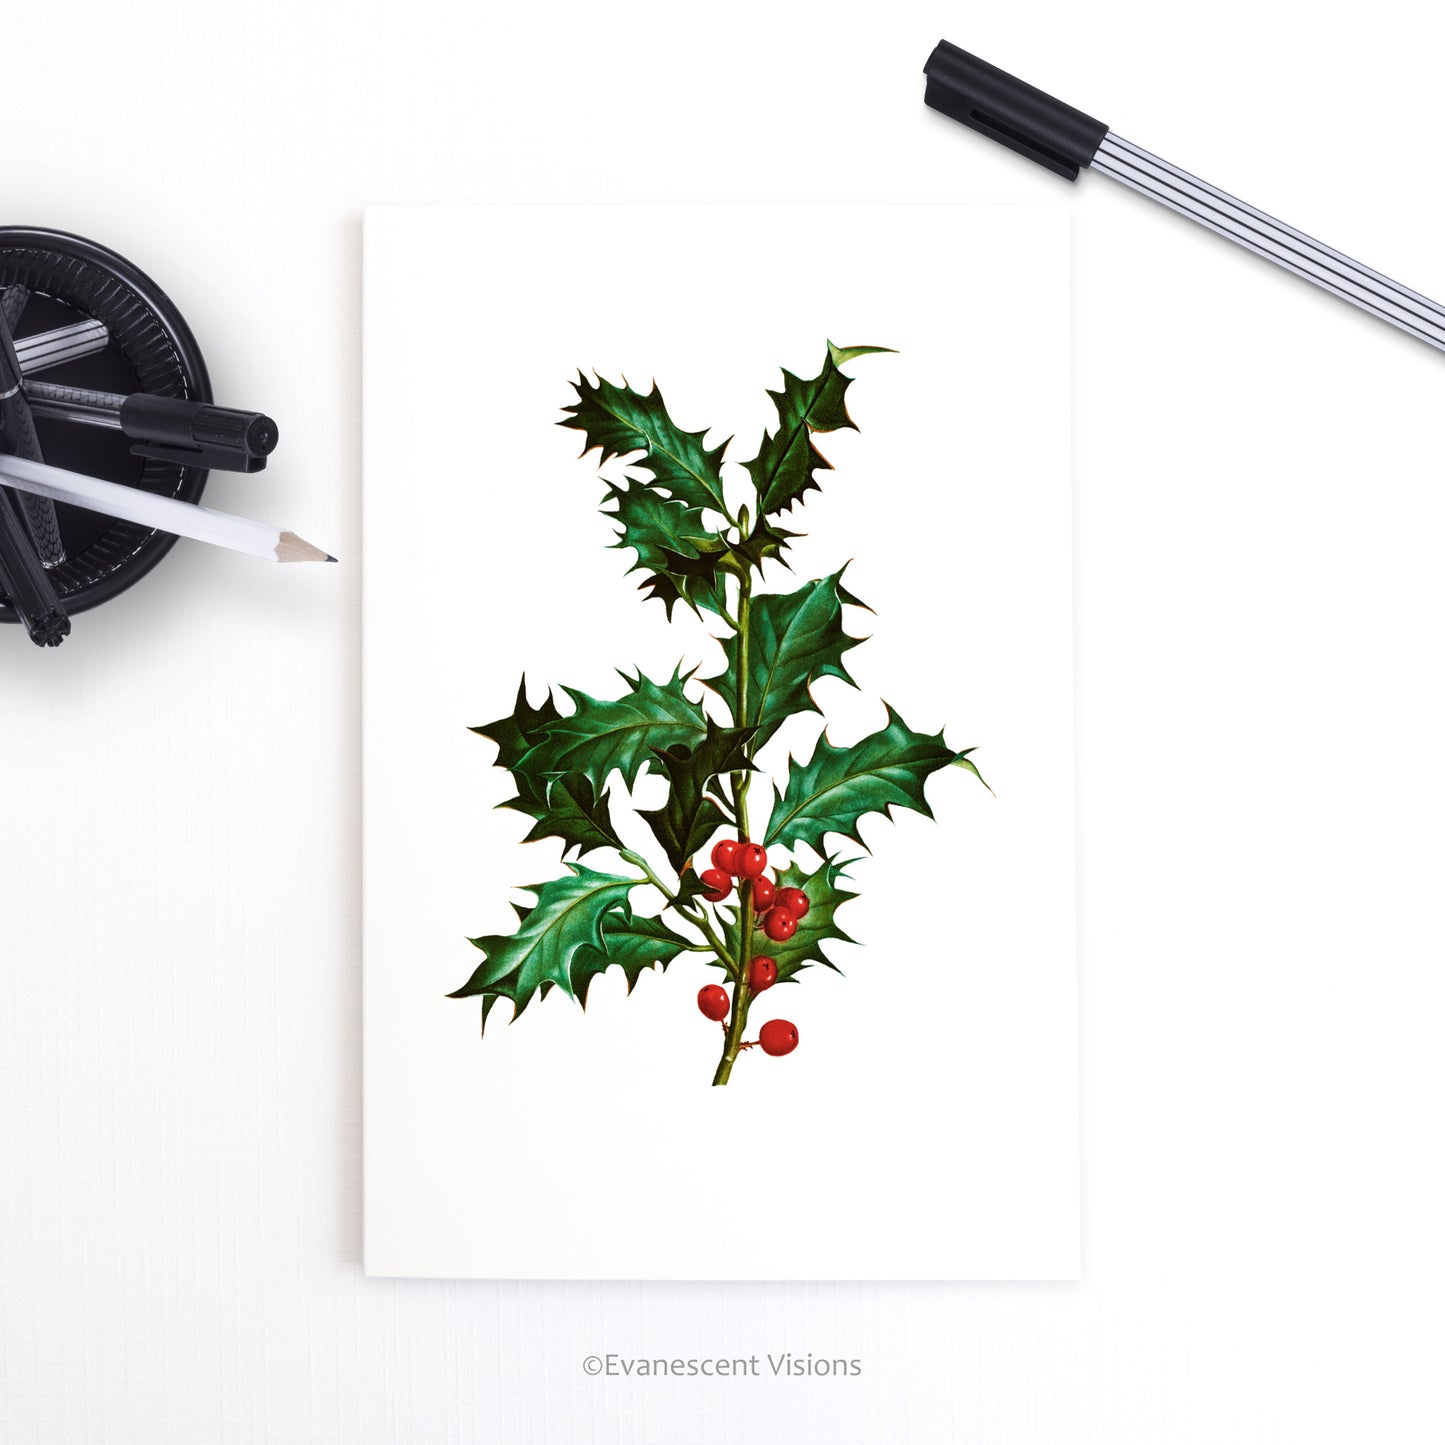 Holly Christmas Greeting Card on a desk with pens